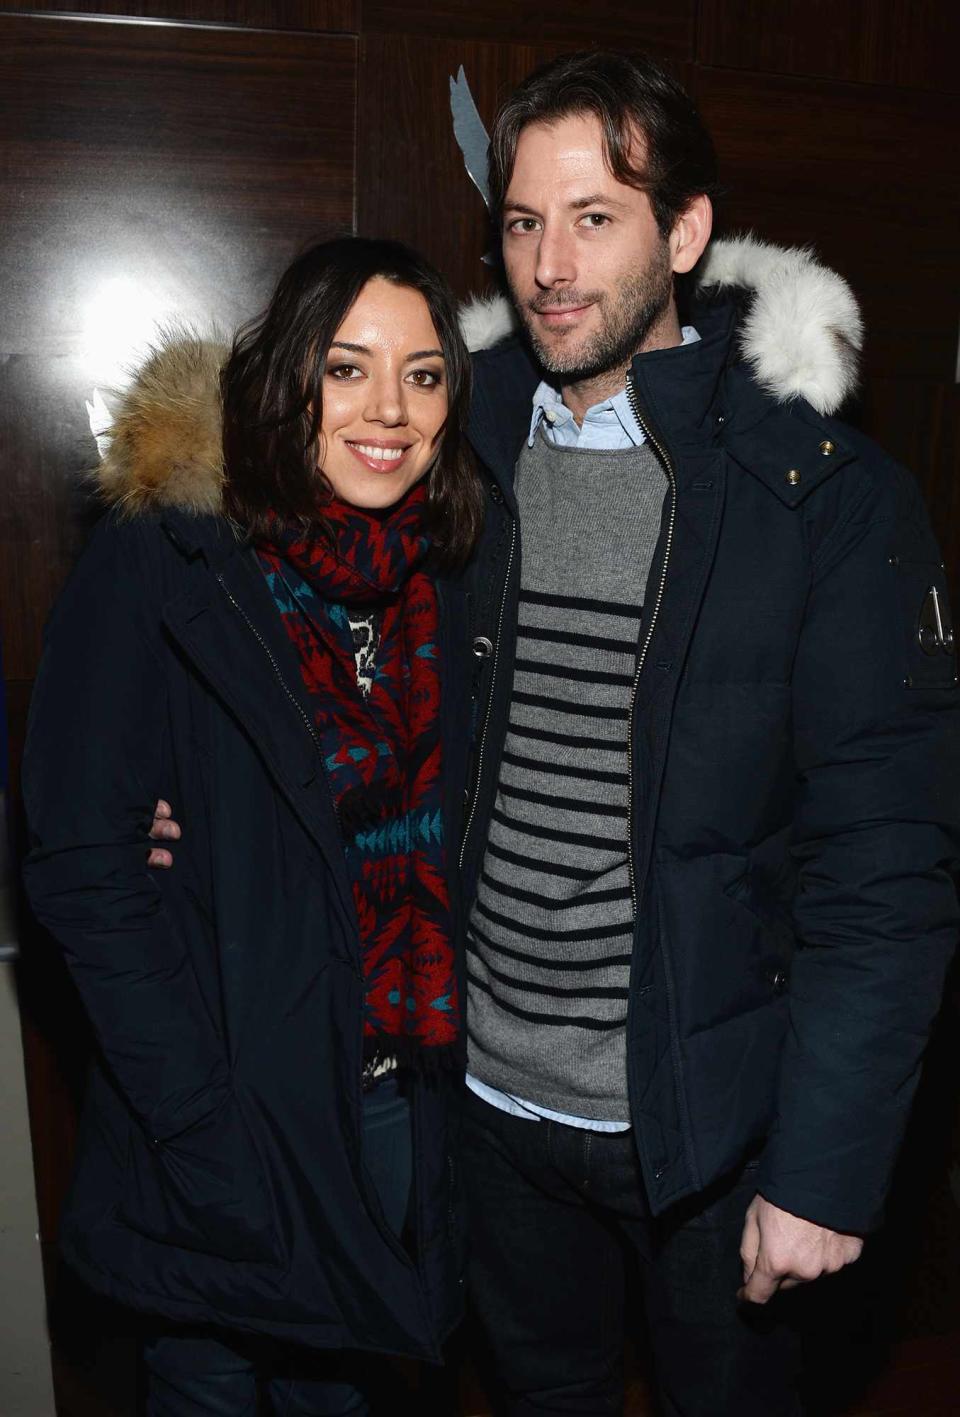 Aubrey Plaza and director/writer Jeff Baena attends the GREY GOOSE Blue Door Hosts "Life After Beth" Party on January 19, 2014 in Park City, Utah